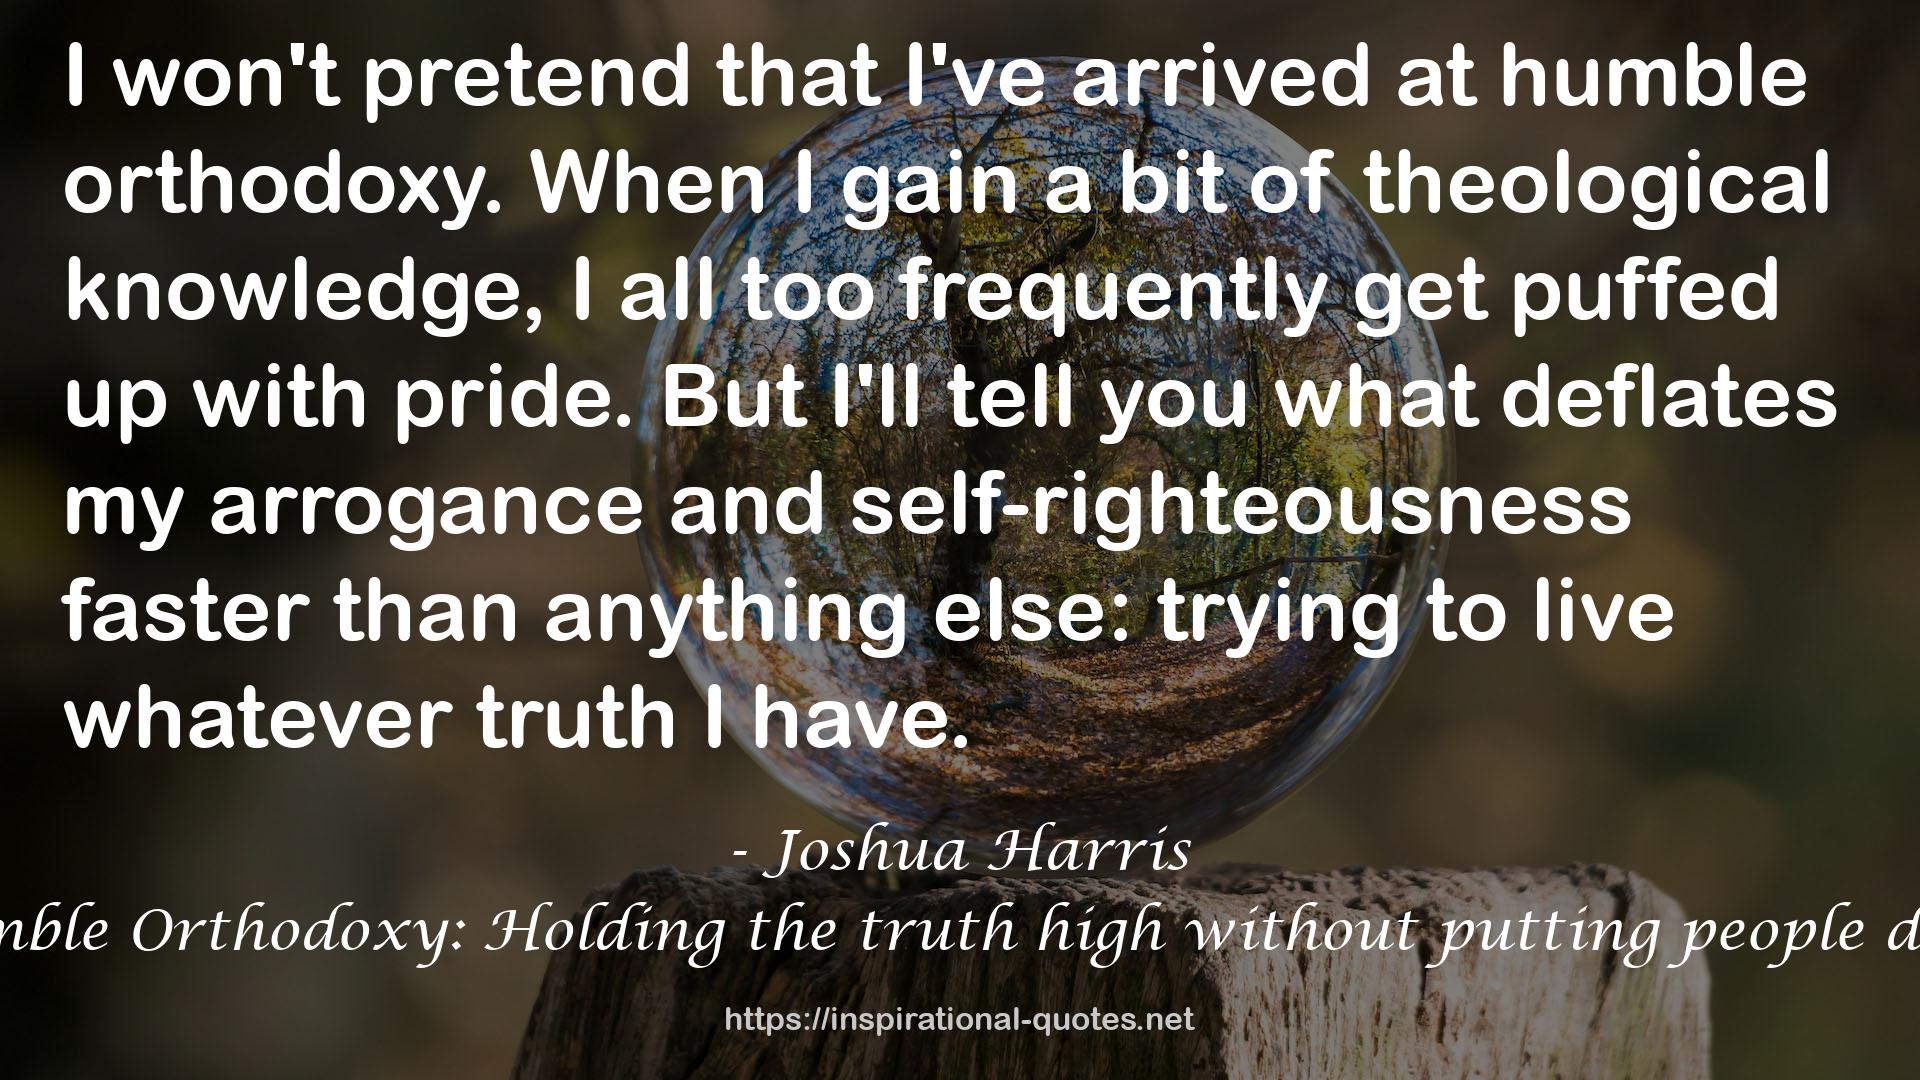 Humble Orthodoxy: Holding the truth high without putting people down QUOTES